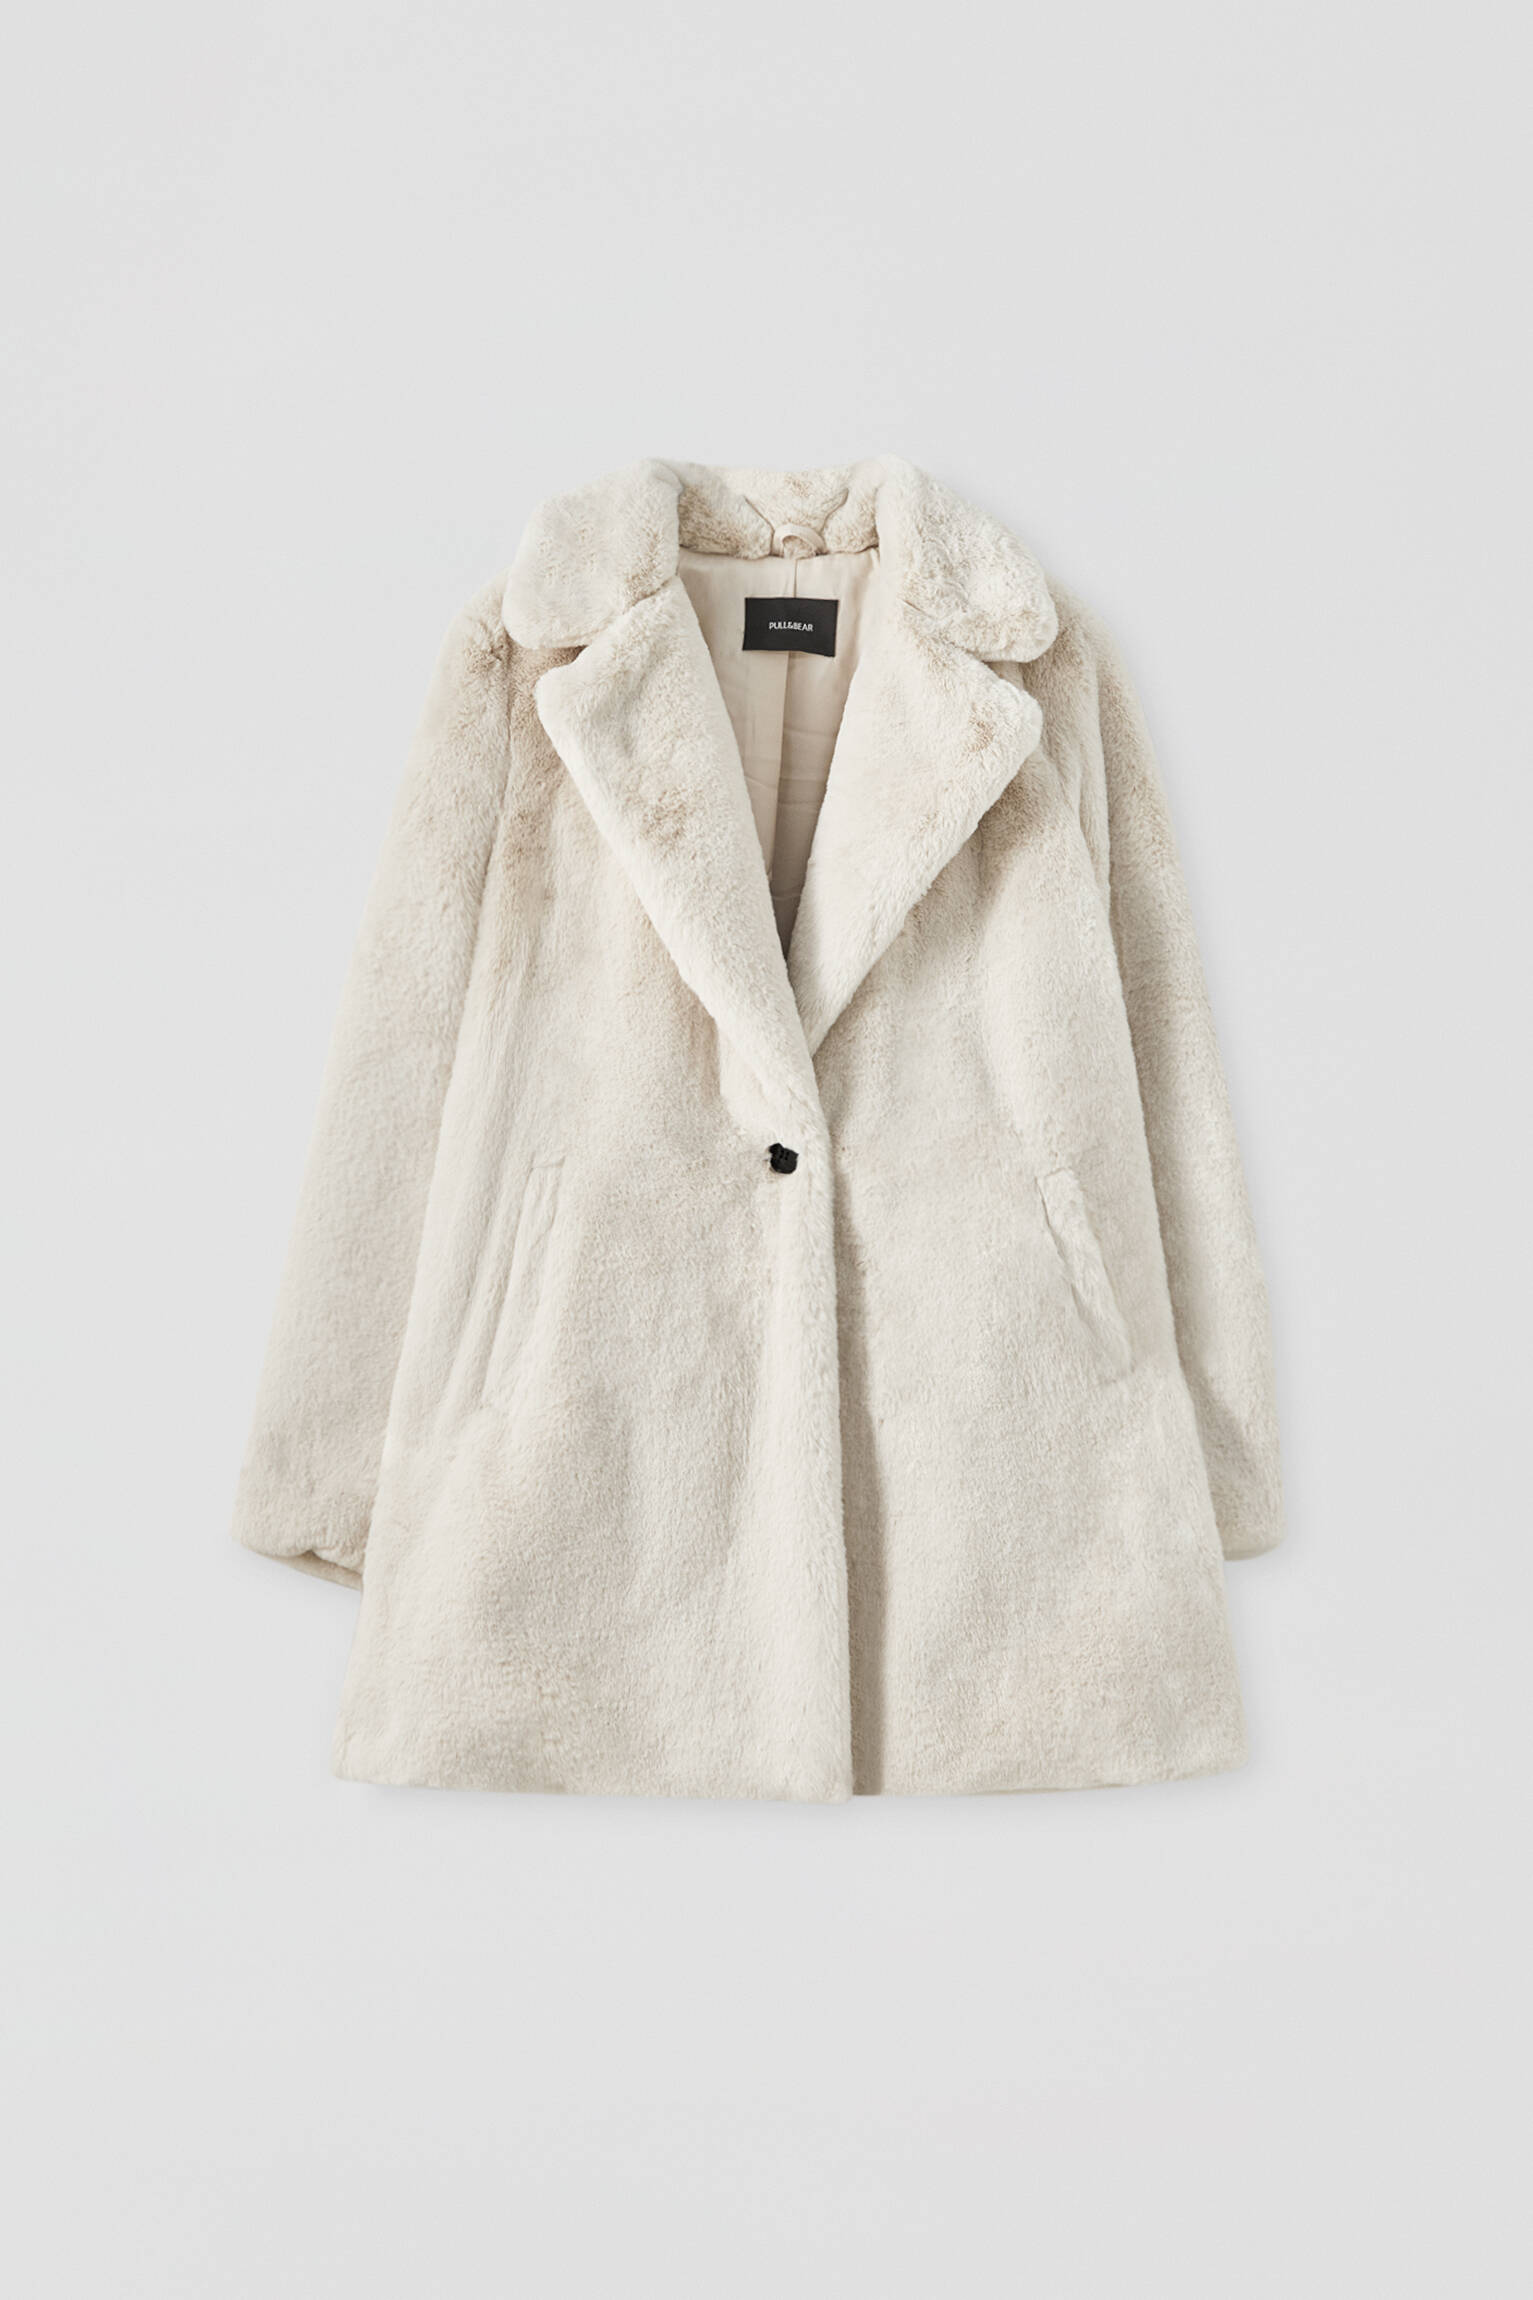 manteau long fausse fourrure pull and bear